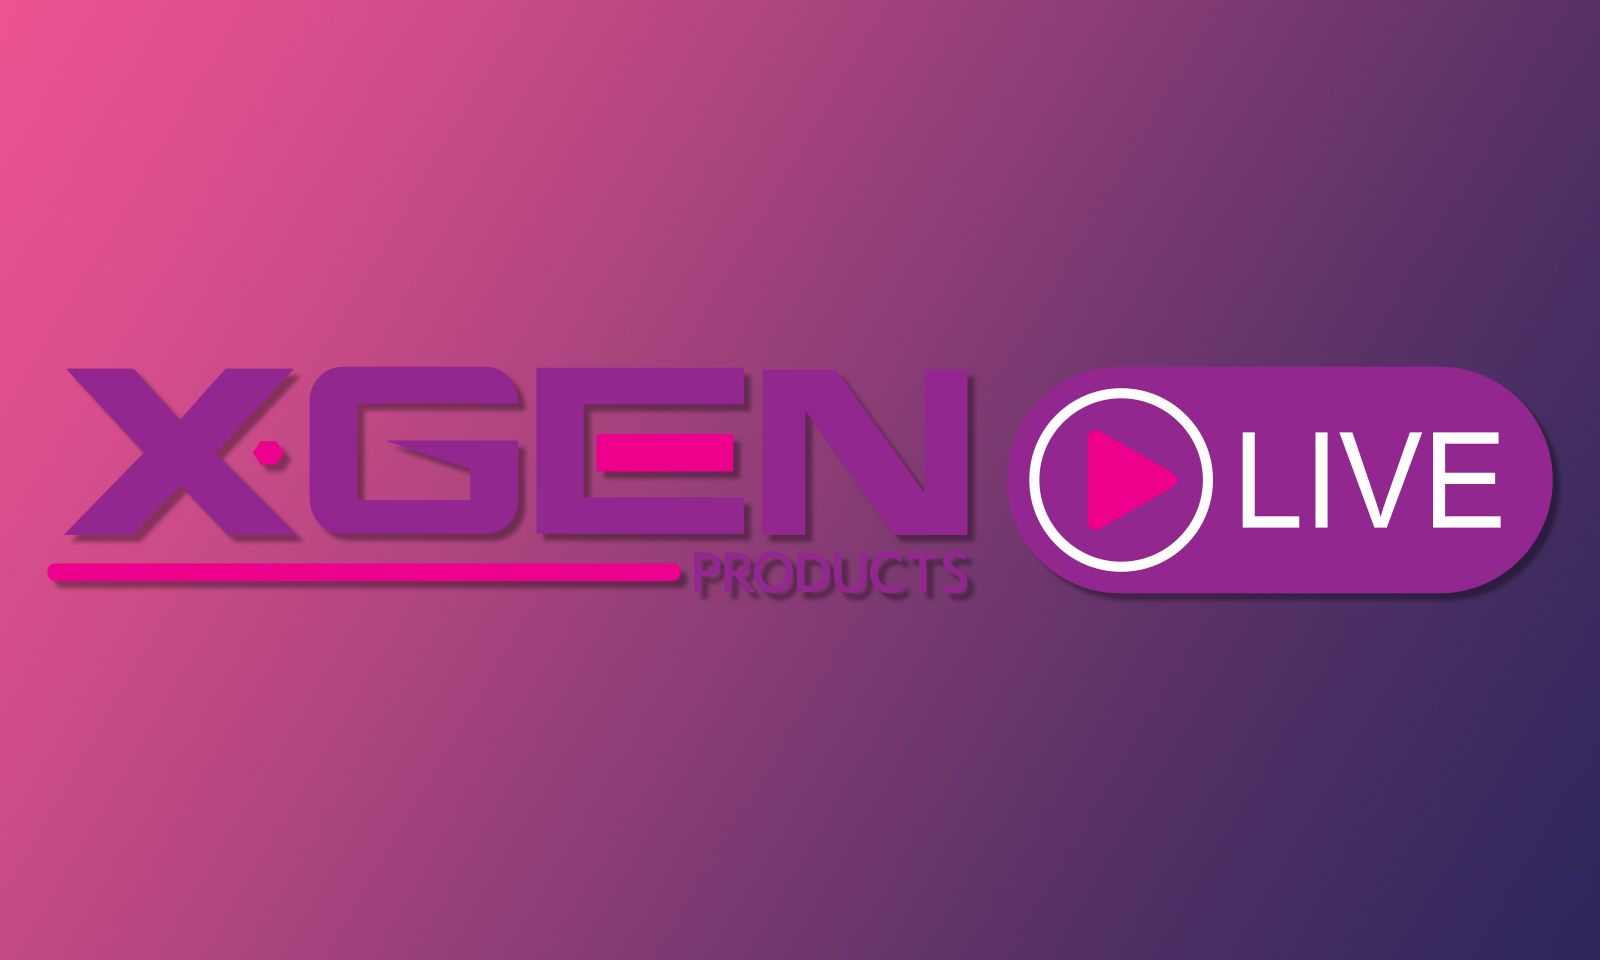 'Xgen Live' Makes Product Demos Possible During Pandemic